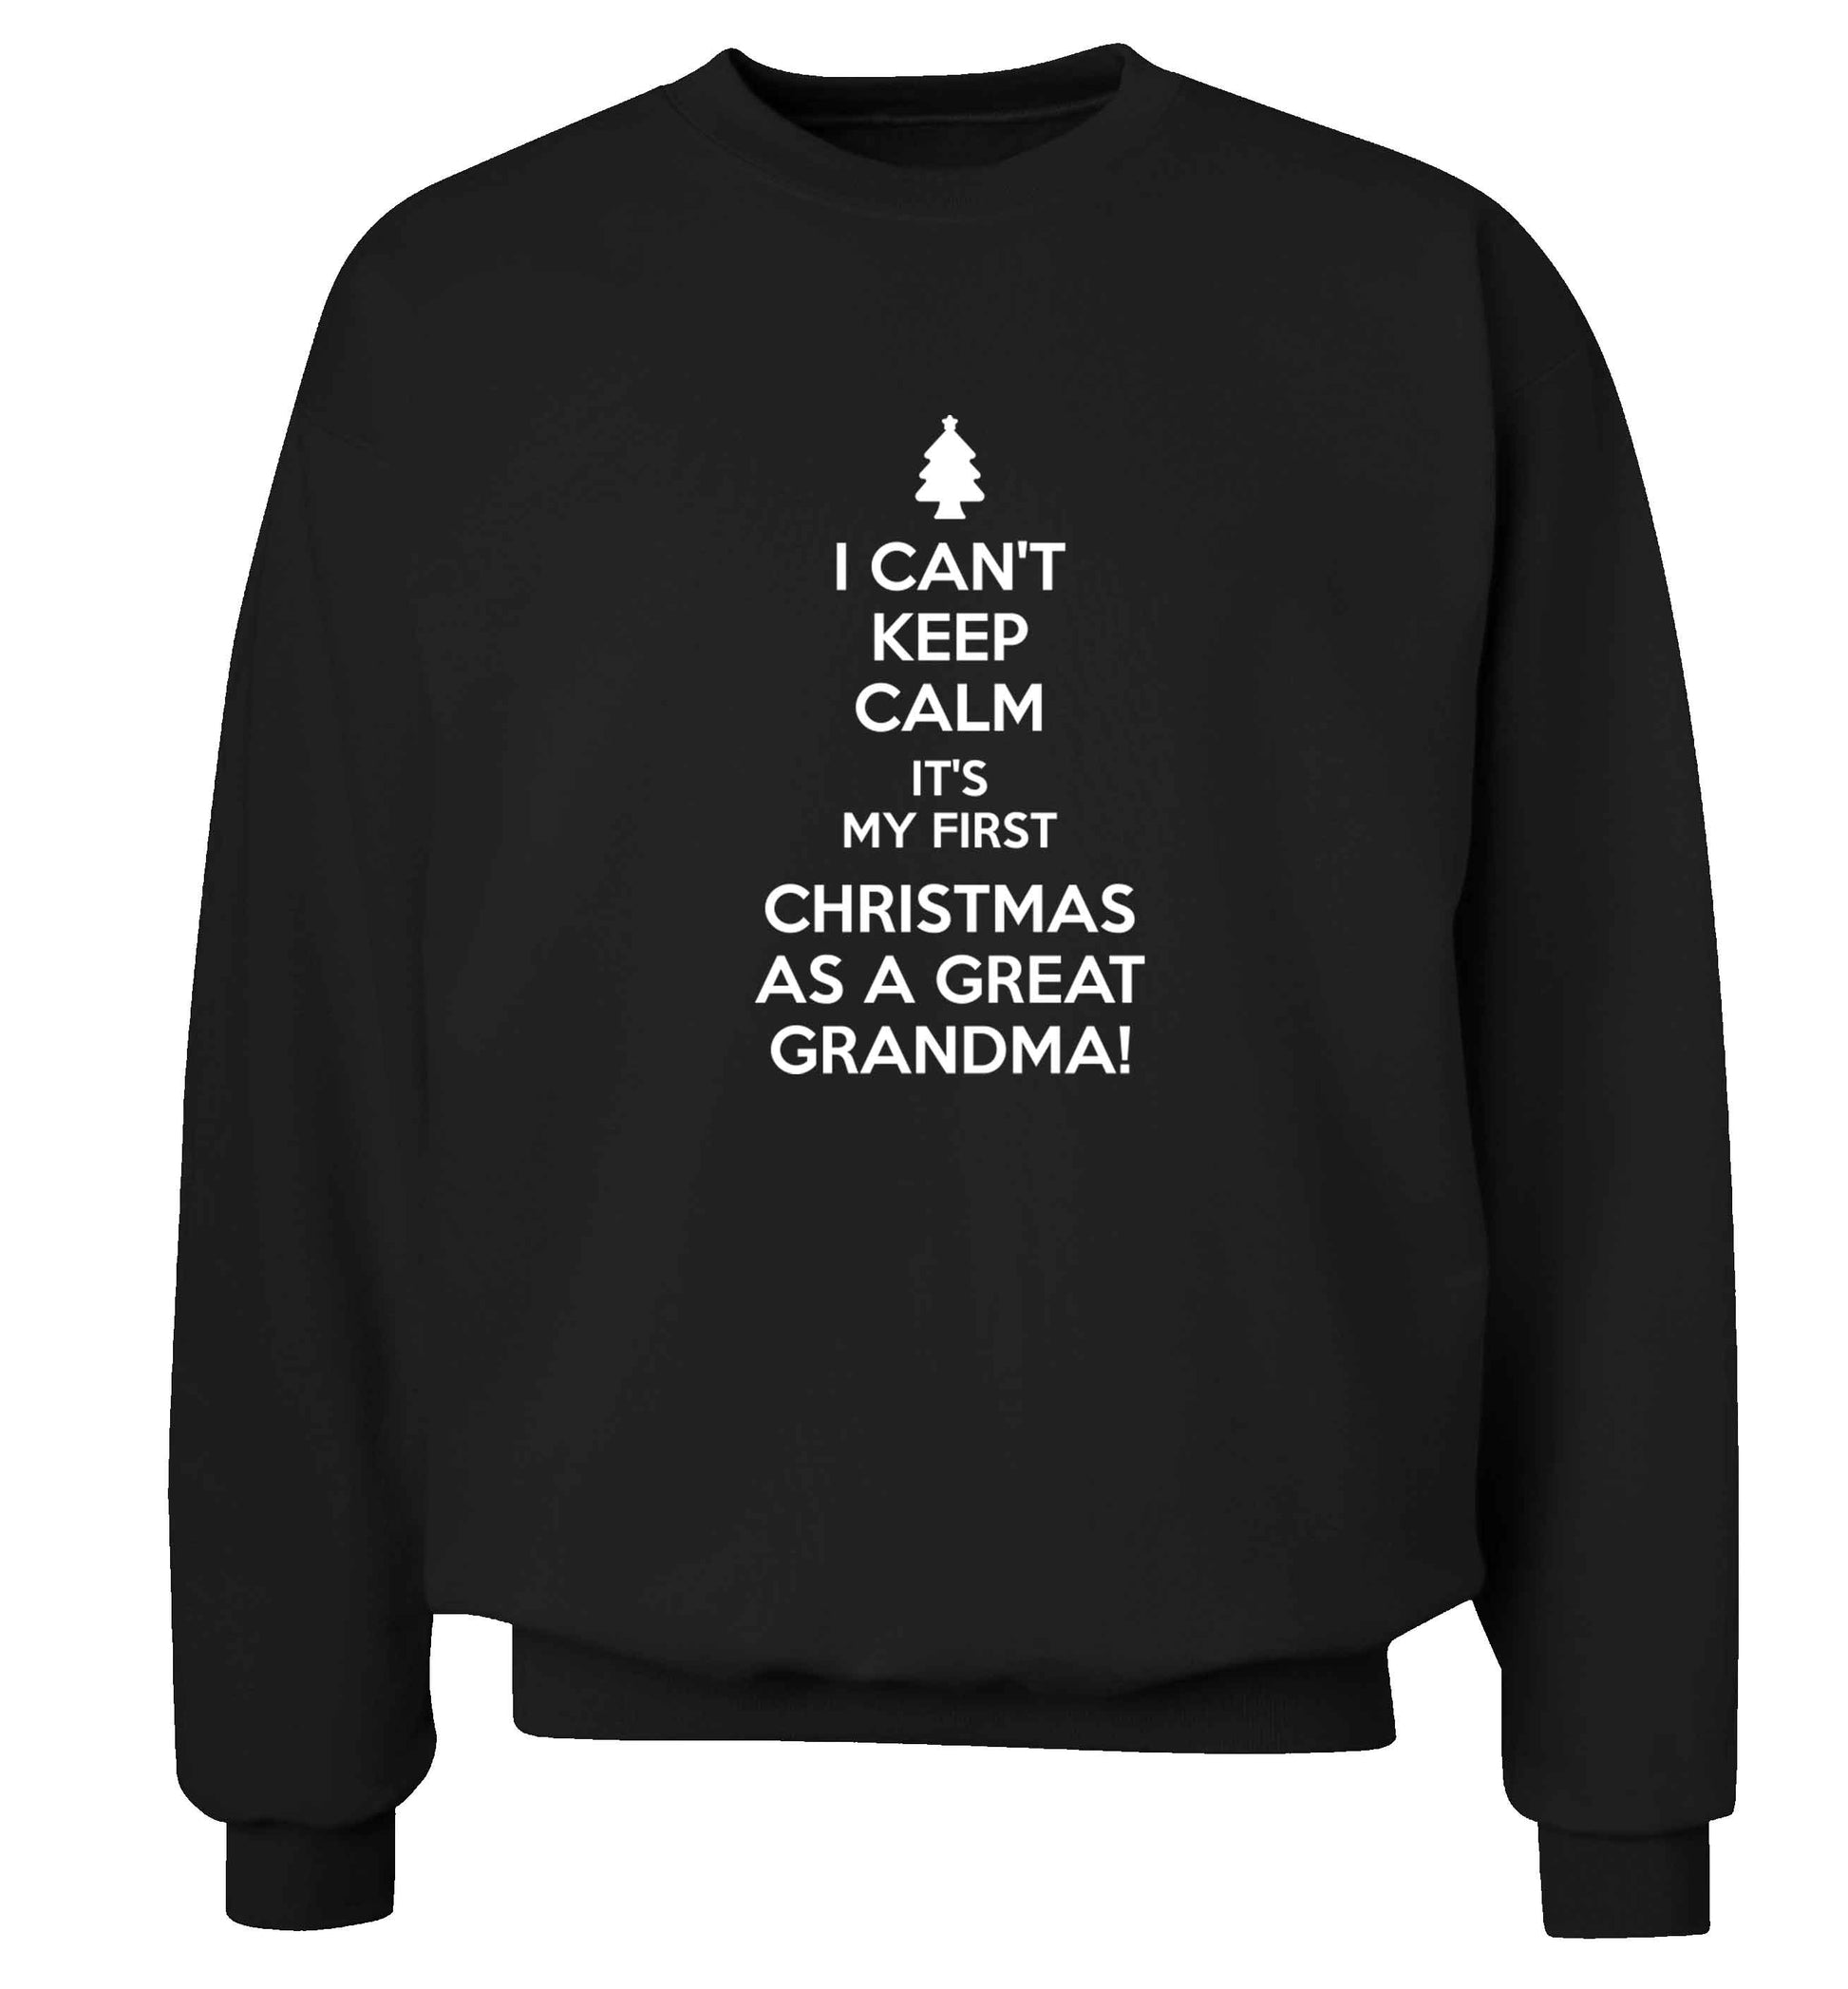 I can't keep calm it's my first Christmas as a great grandma! Adult's unisex black Sweater 2XL